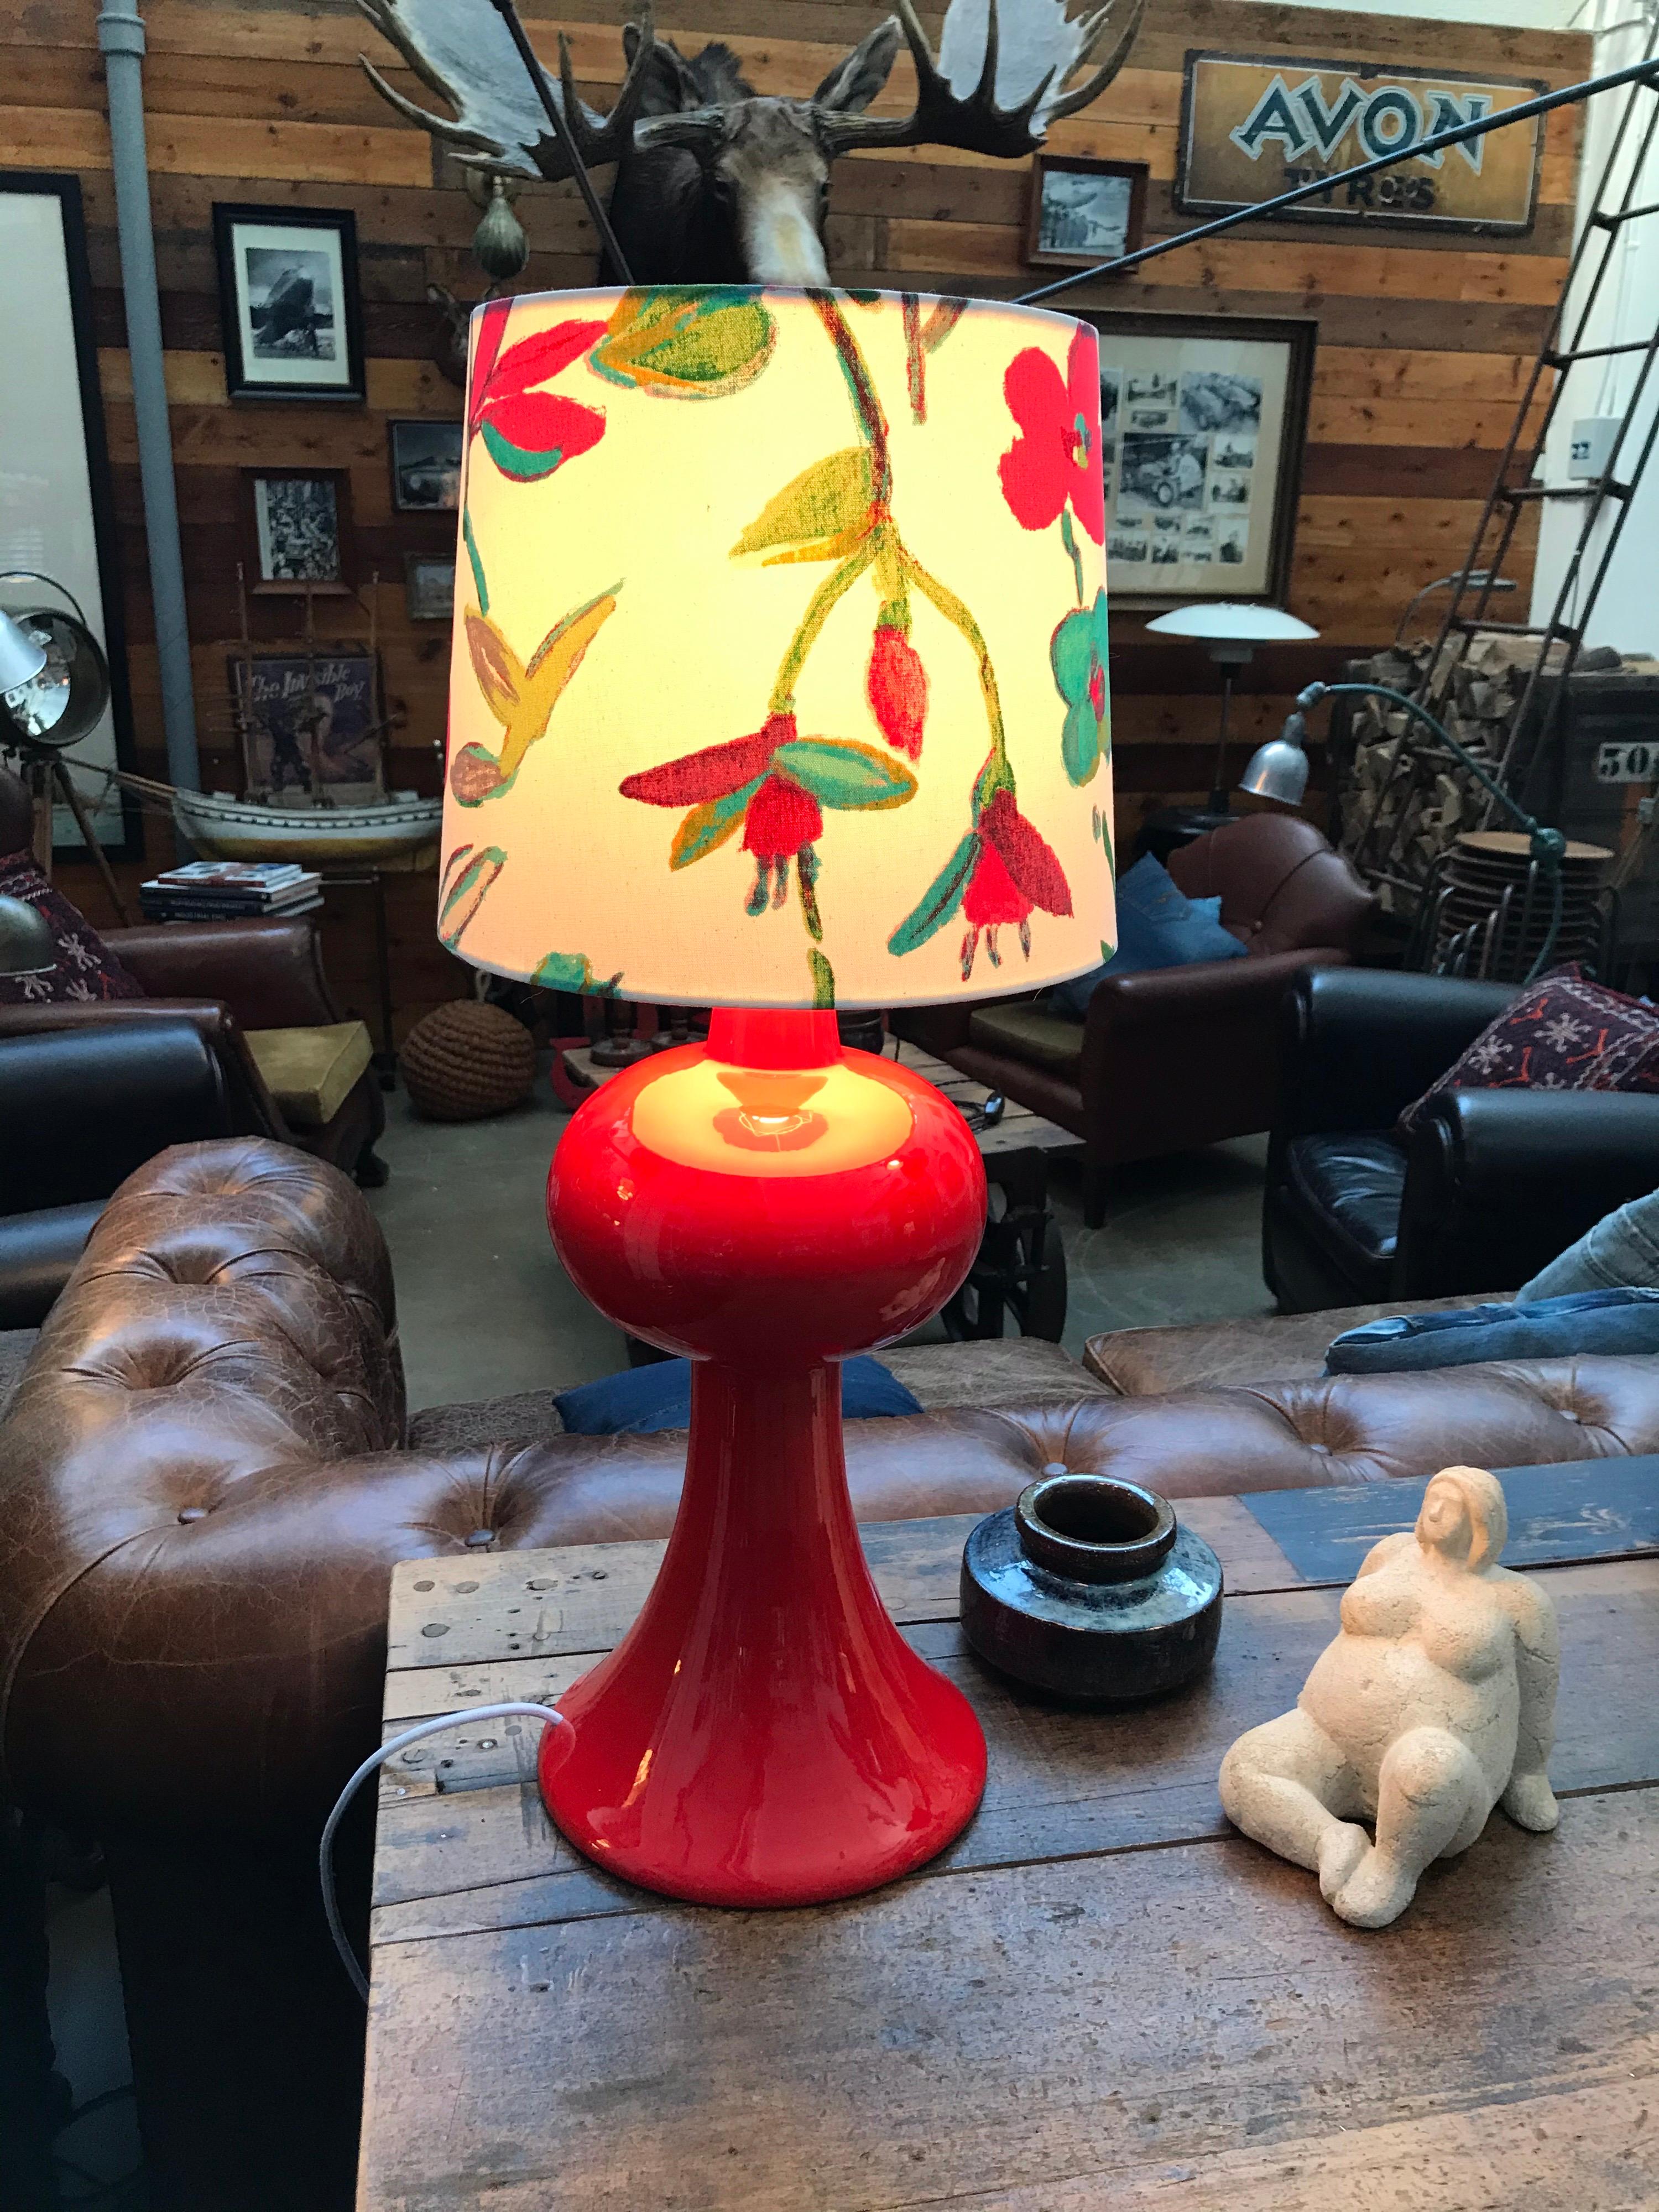 Vintage porcelain table lamp from the 1960s
This retro table lamp has great proportions and a striking red glaze to the surface.
Rewired and ready to use.
Can be fitted with an EU or US plug.
A beautiful lamp from a great design period.
Lamp shade